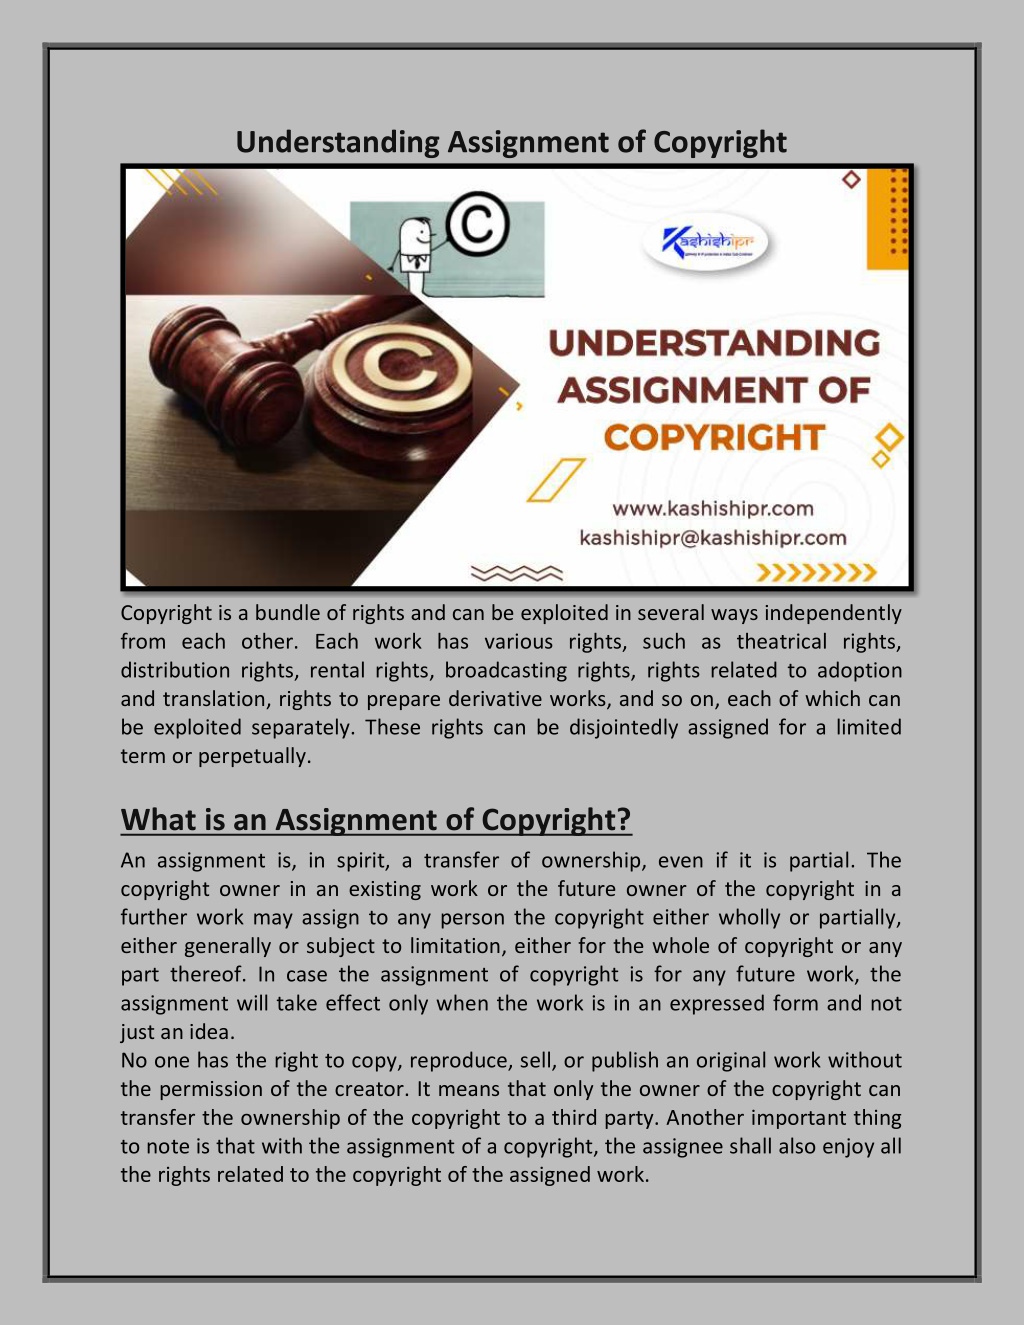 assignment of copyright meaning